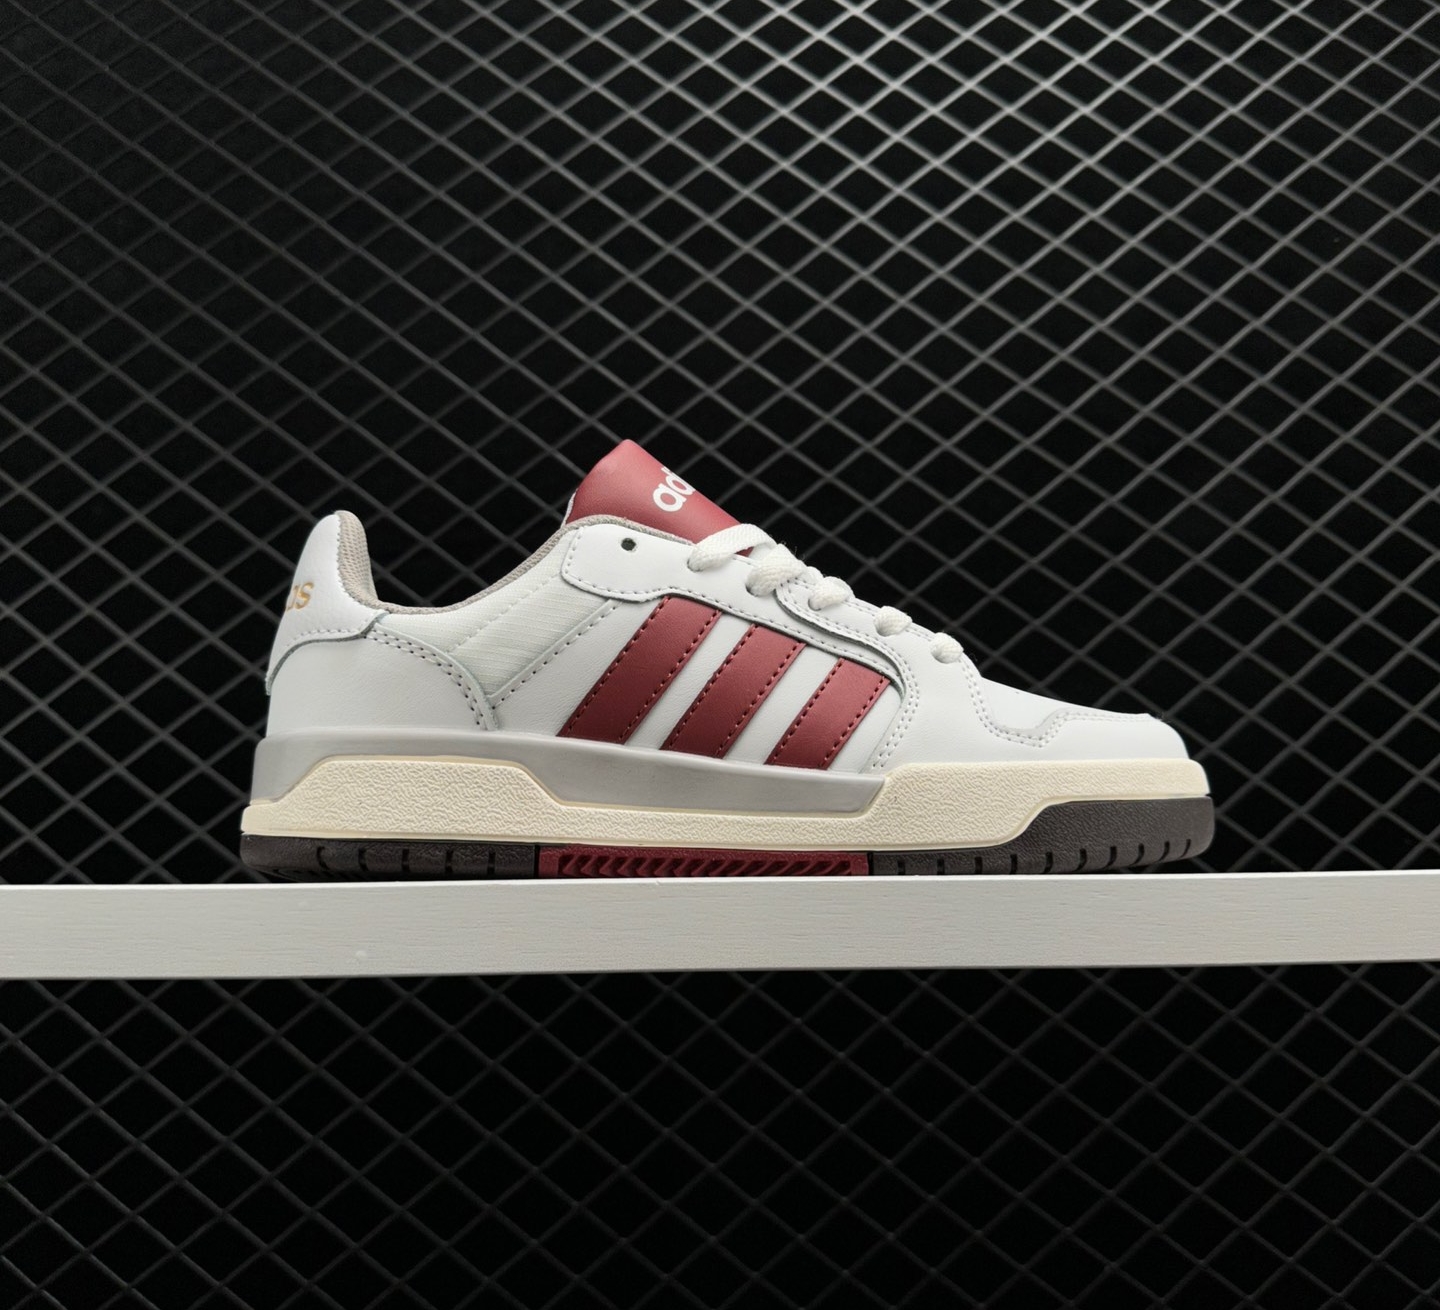 Adidas Neo Entrap White Red FW3462 - Stylish Sneakers for Men